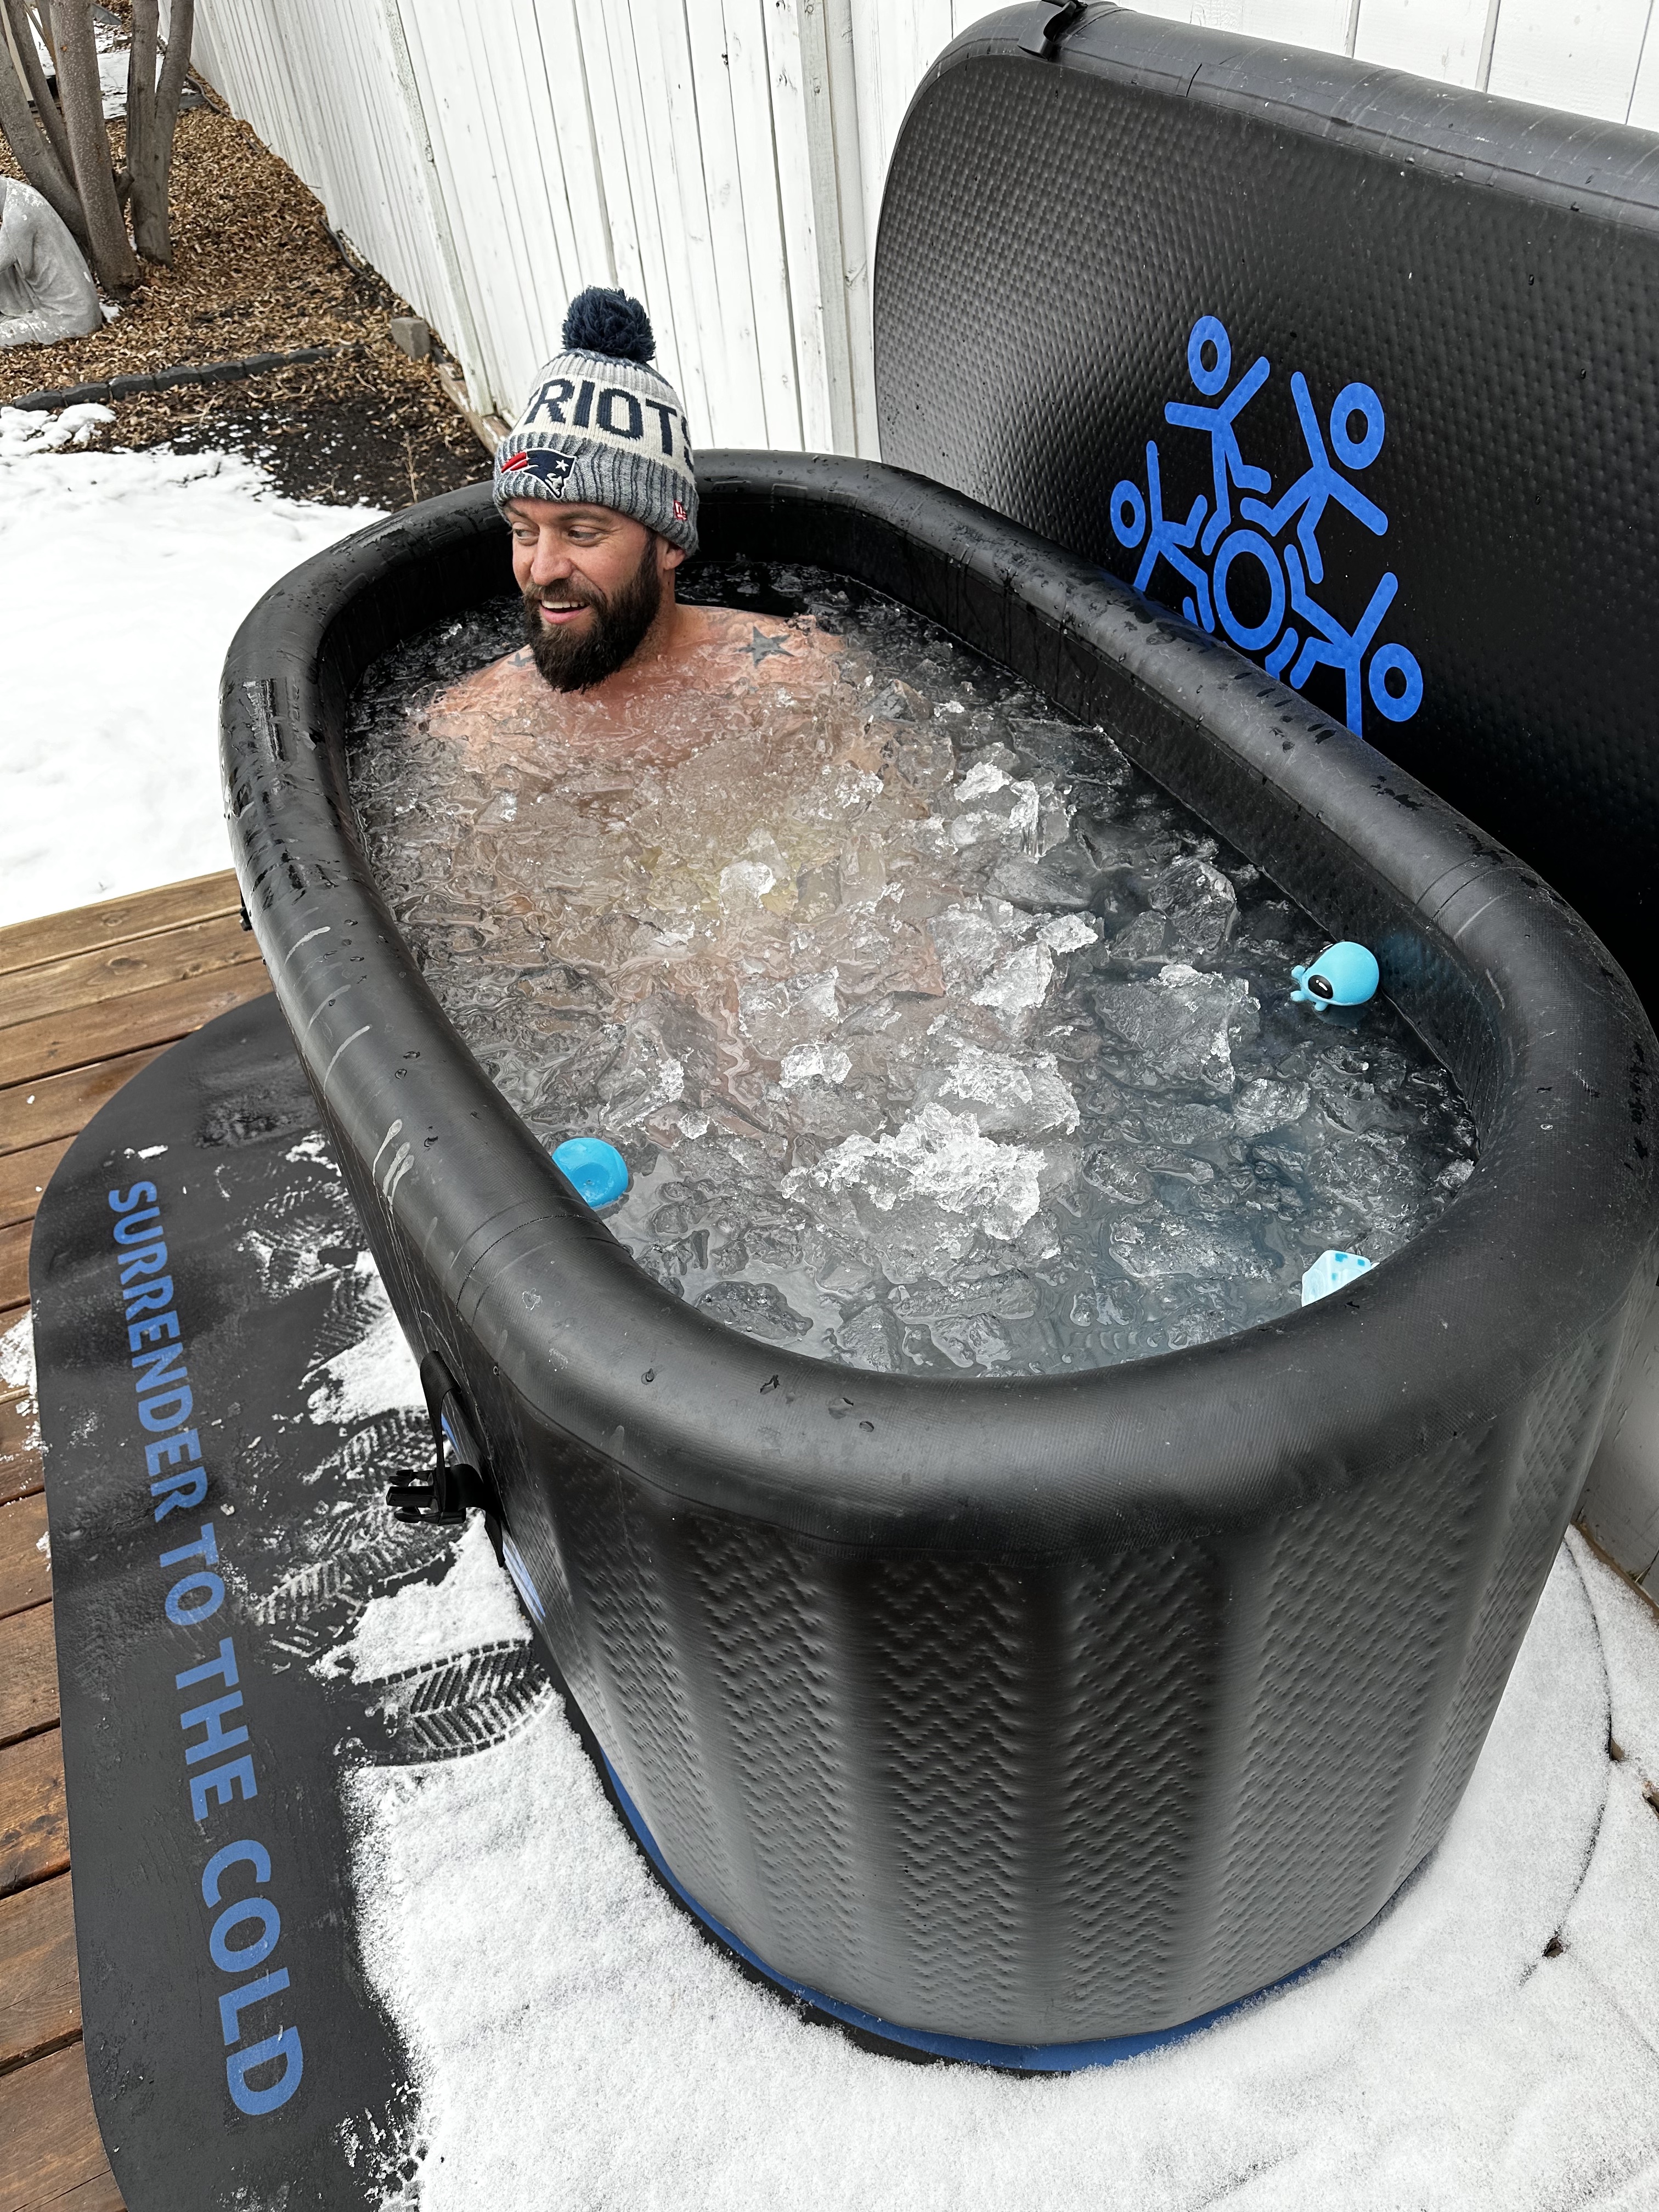 COLD PLUNGING - Is the new hype on social media real???